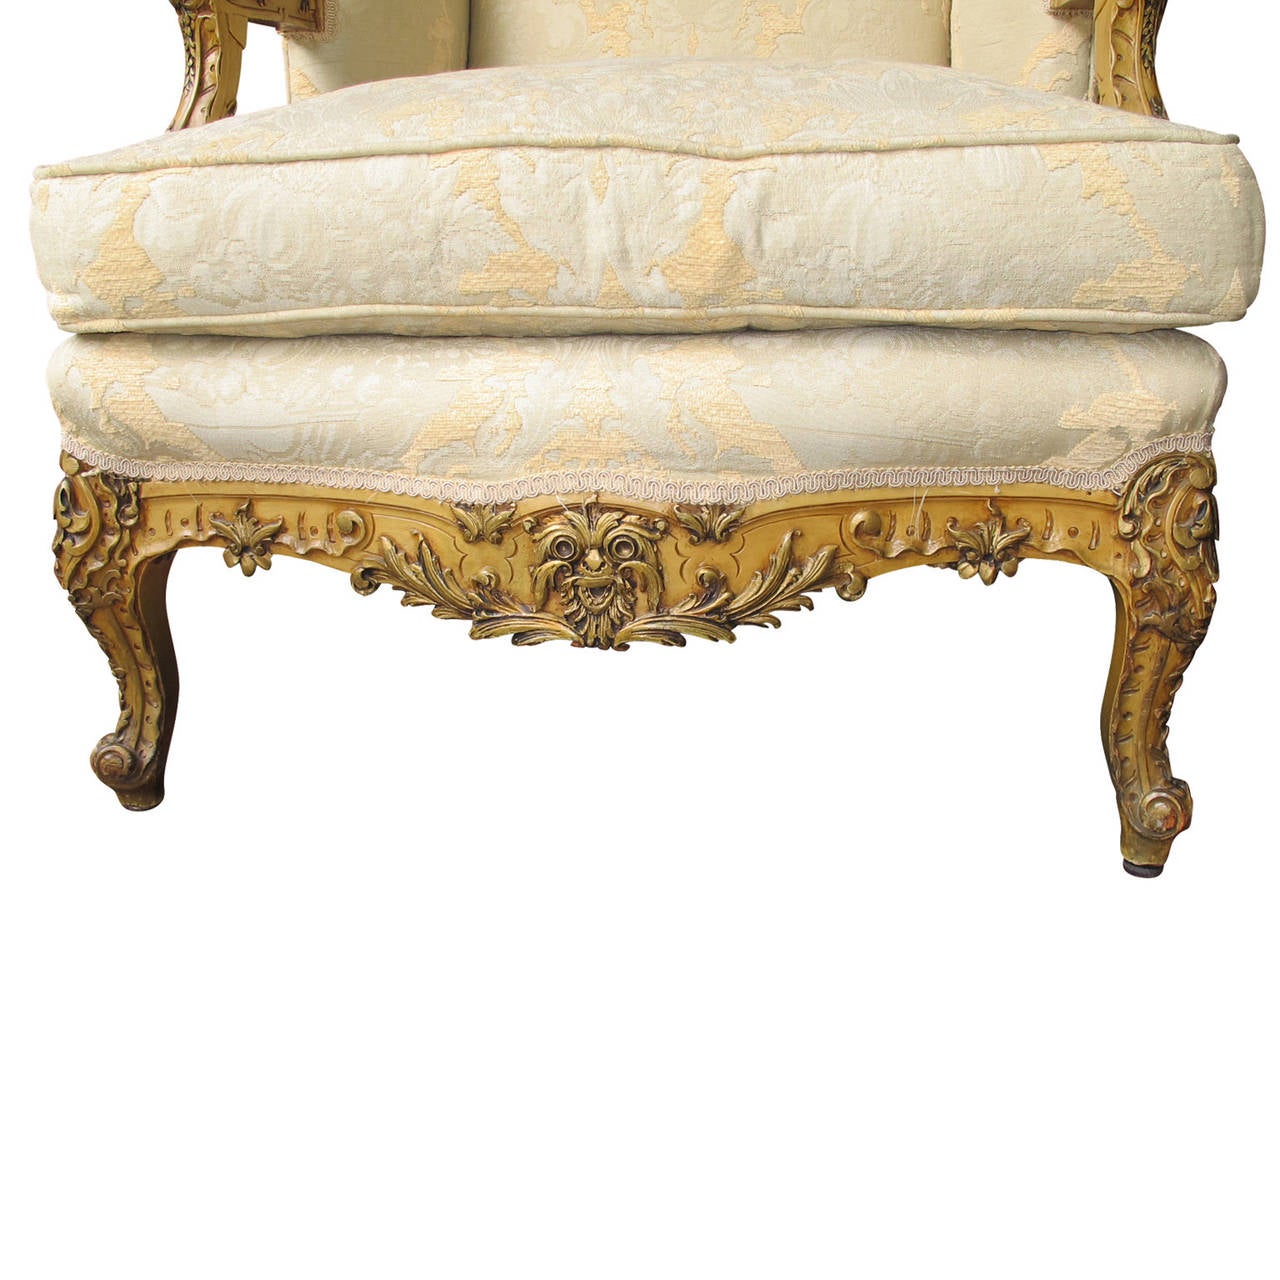 19th Century Beautiful Louis XIV Style Bergere Chair